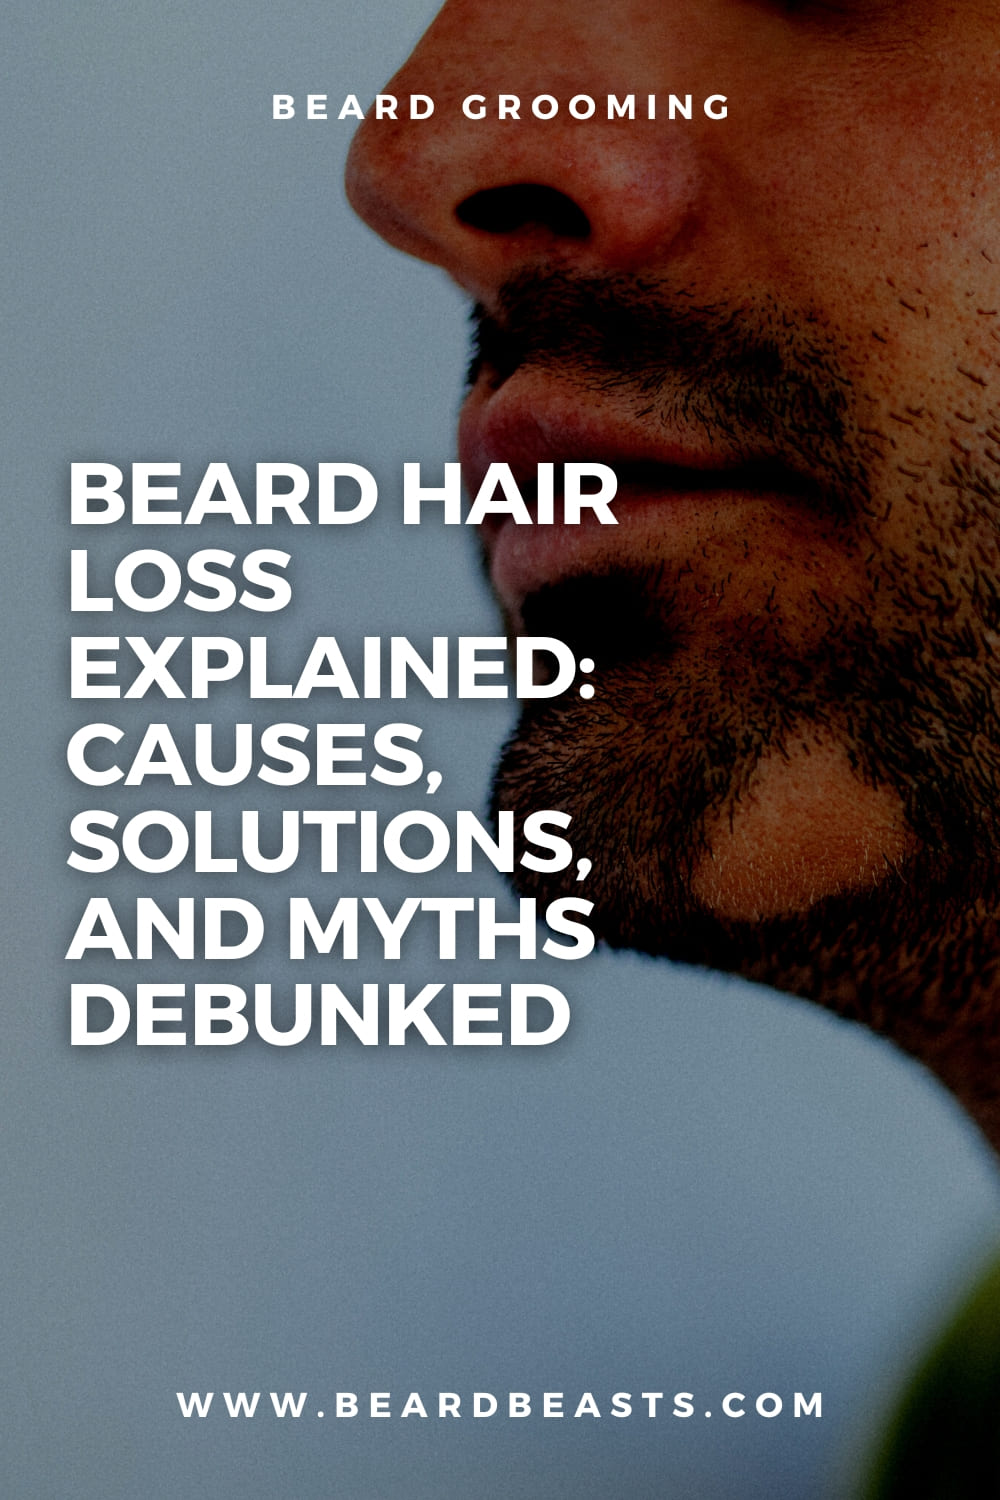 Beard Hair Loss Explained: Causes, Solutions, and Myths Debunked Pinterest Pin